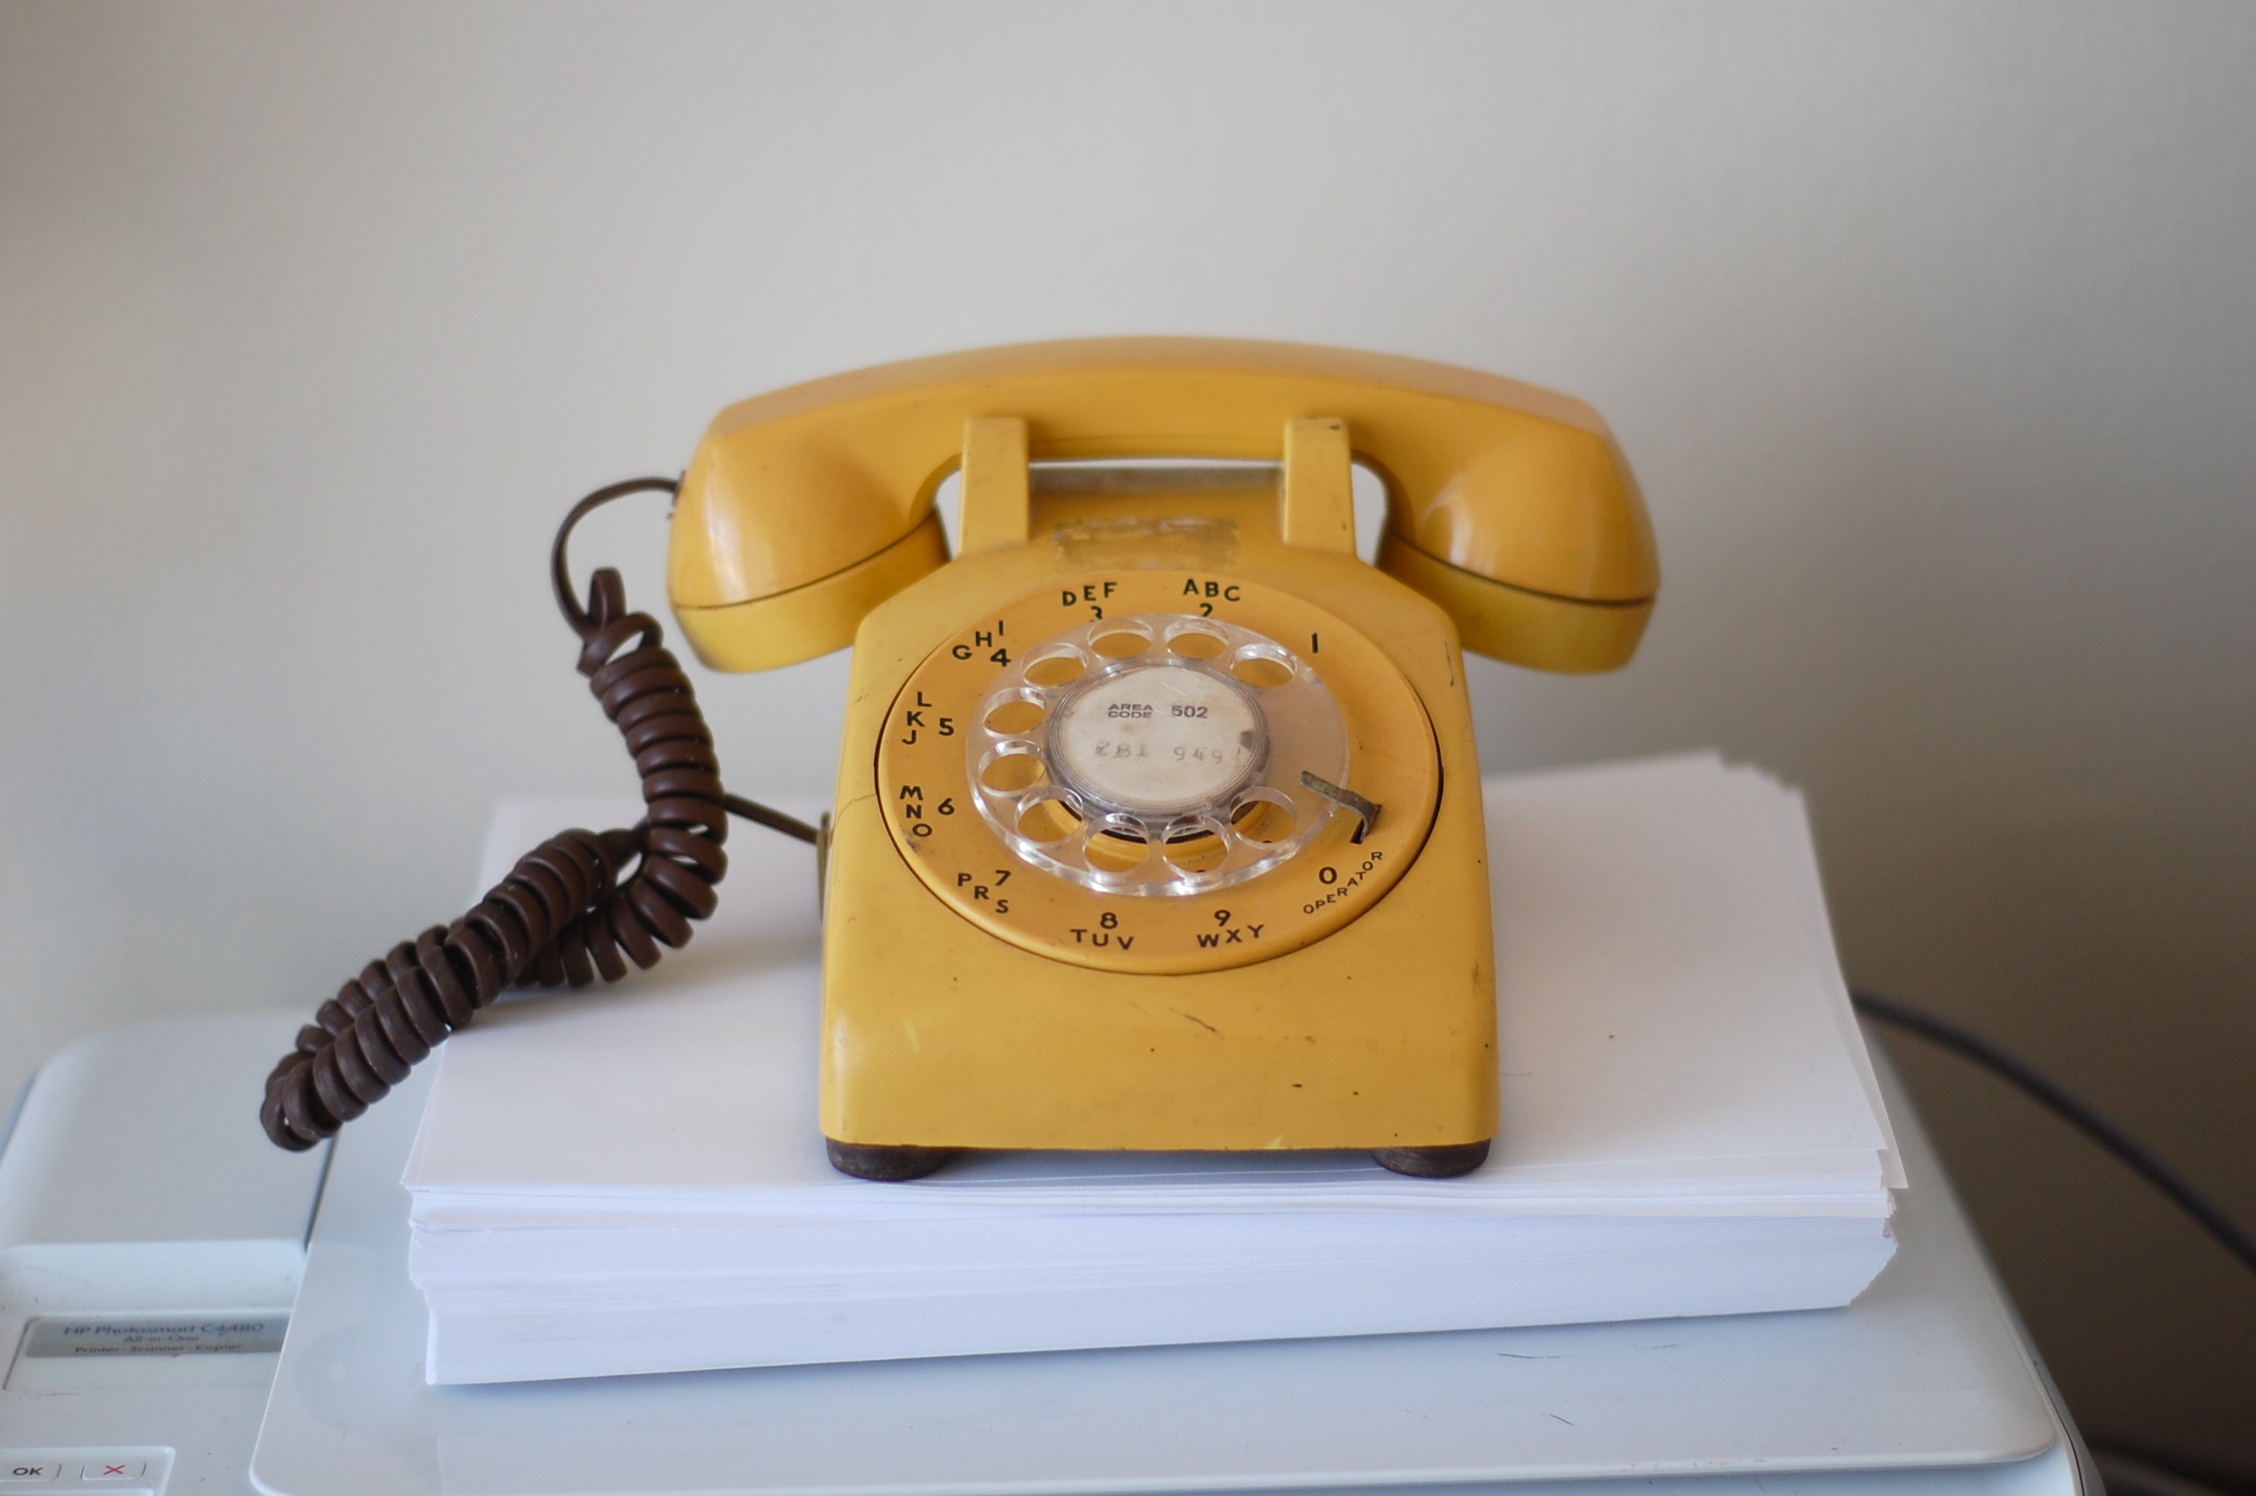 File:New Phone is an Old Phone.jpg - Wikimedia Commons